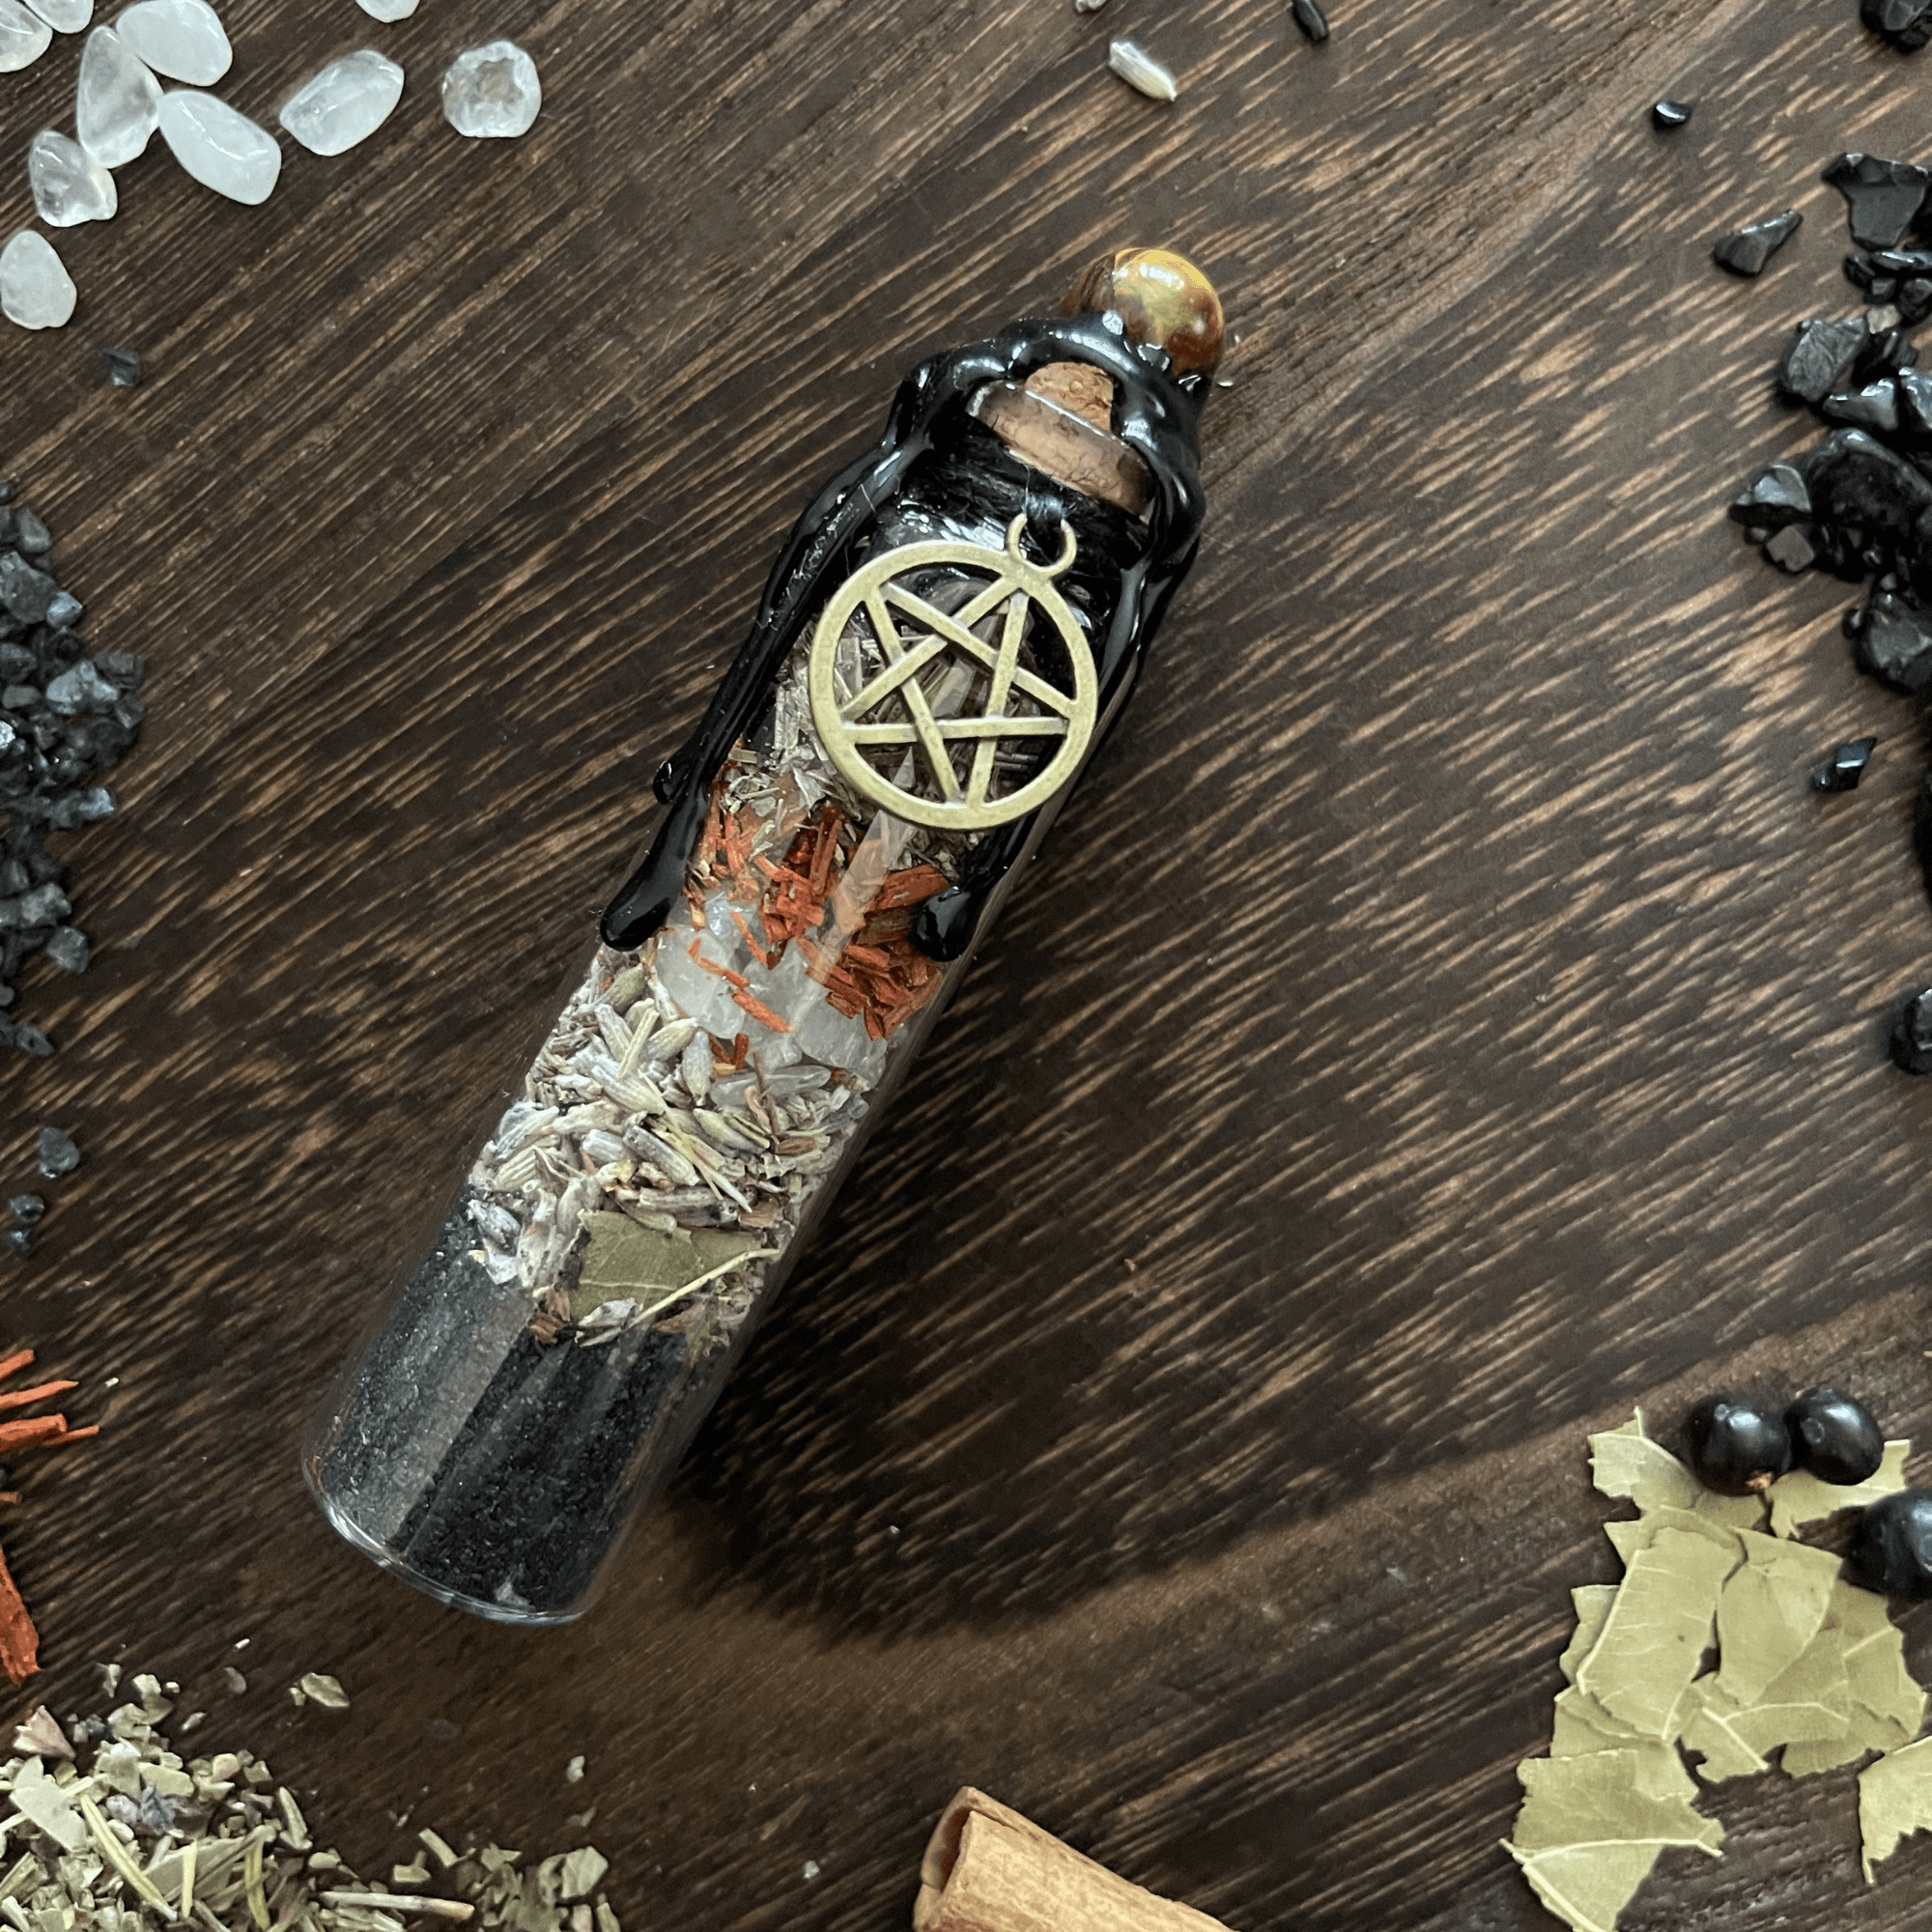 Protection Spell Jar, Intention Jar, Witch's Spell Bottle - Classic Variable